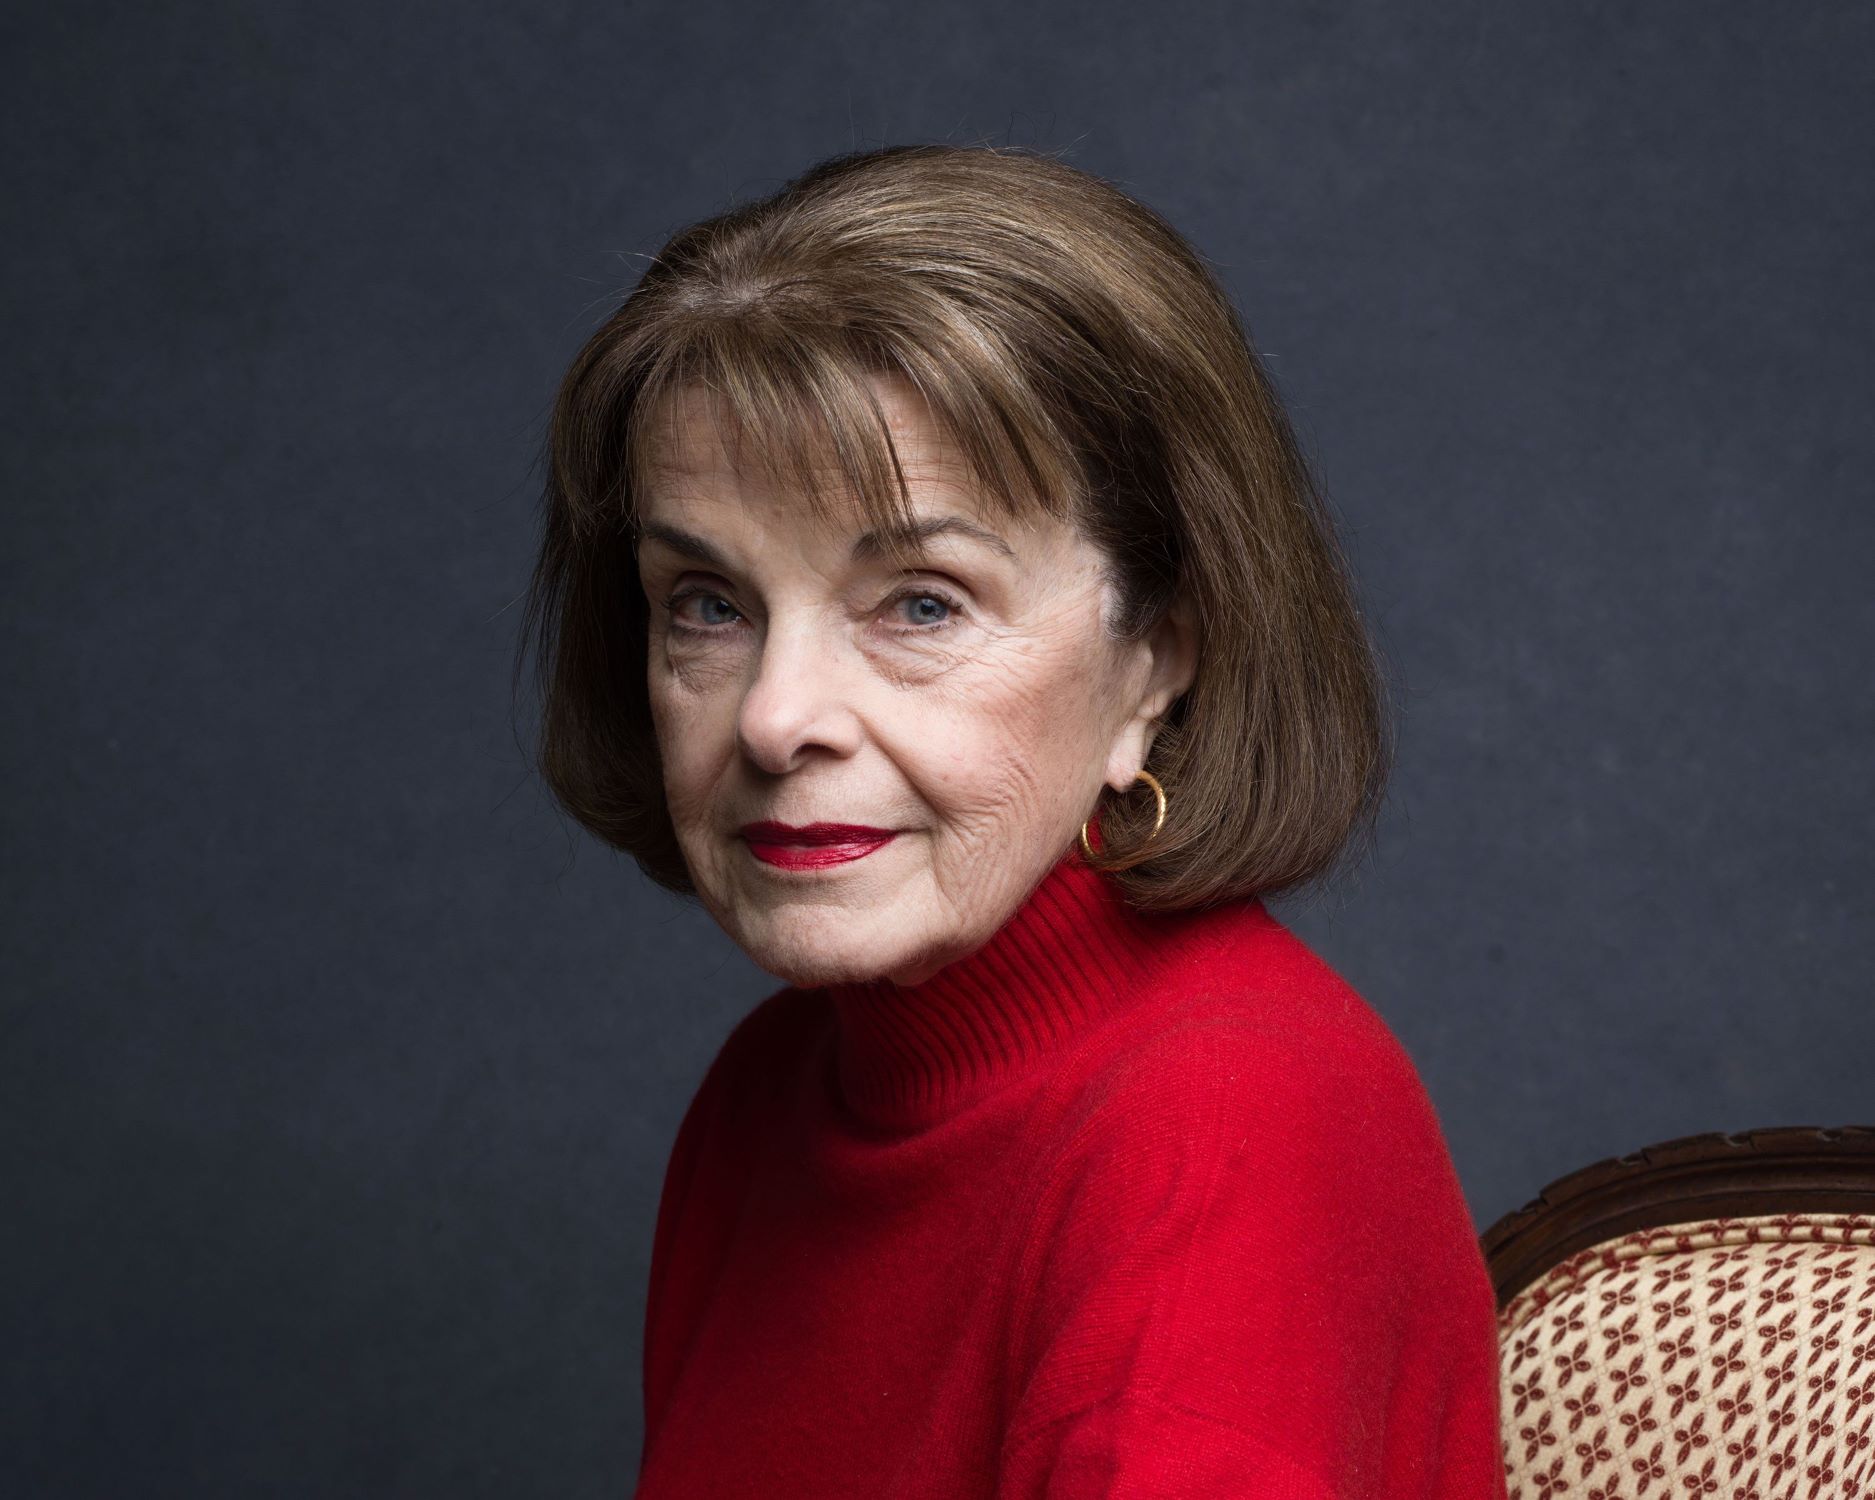 dianne-feinstein-posed-for-photo-hours-before-her-death